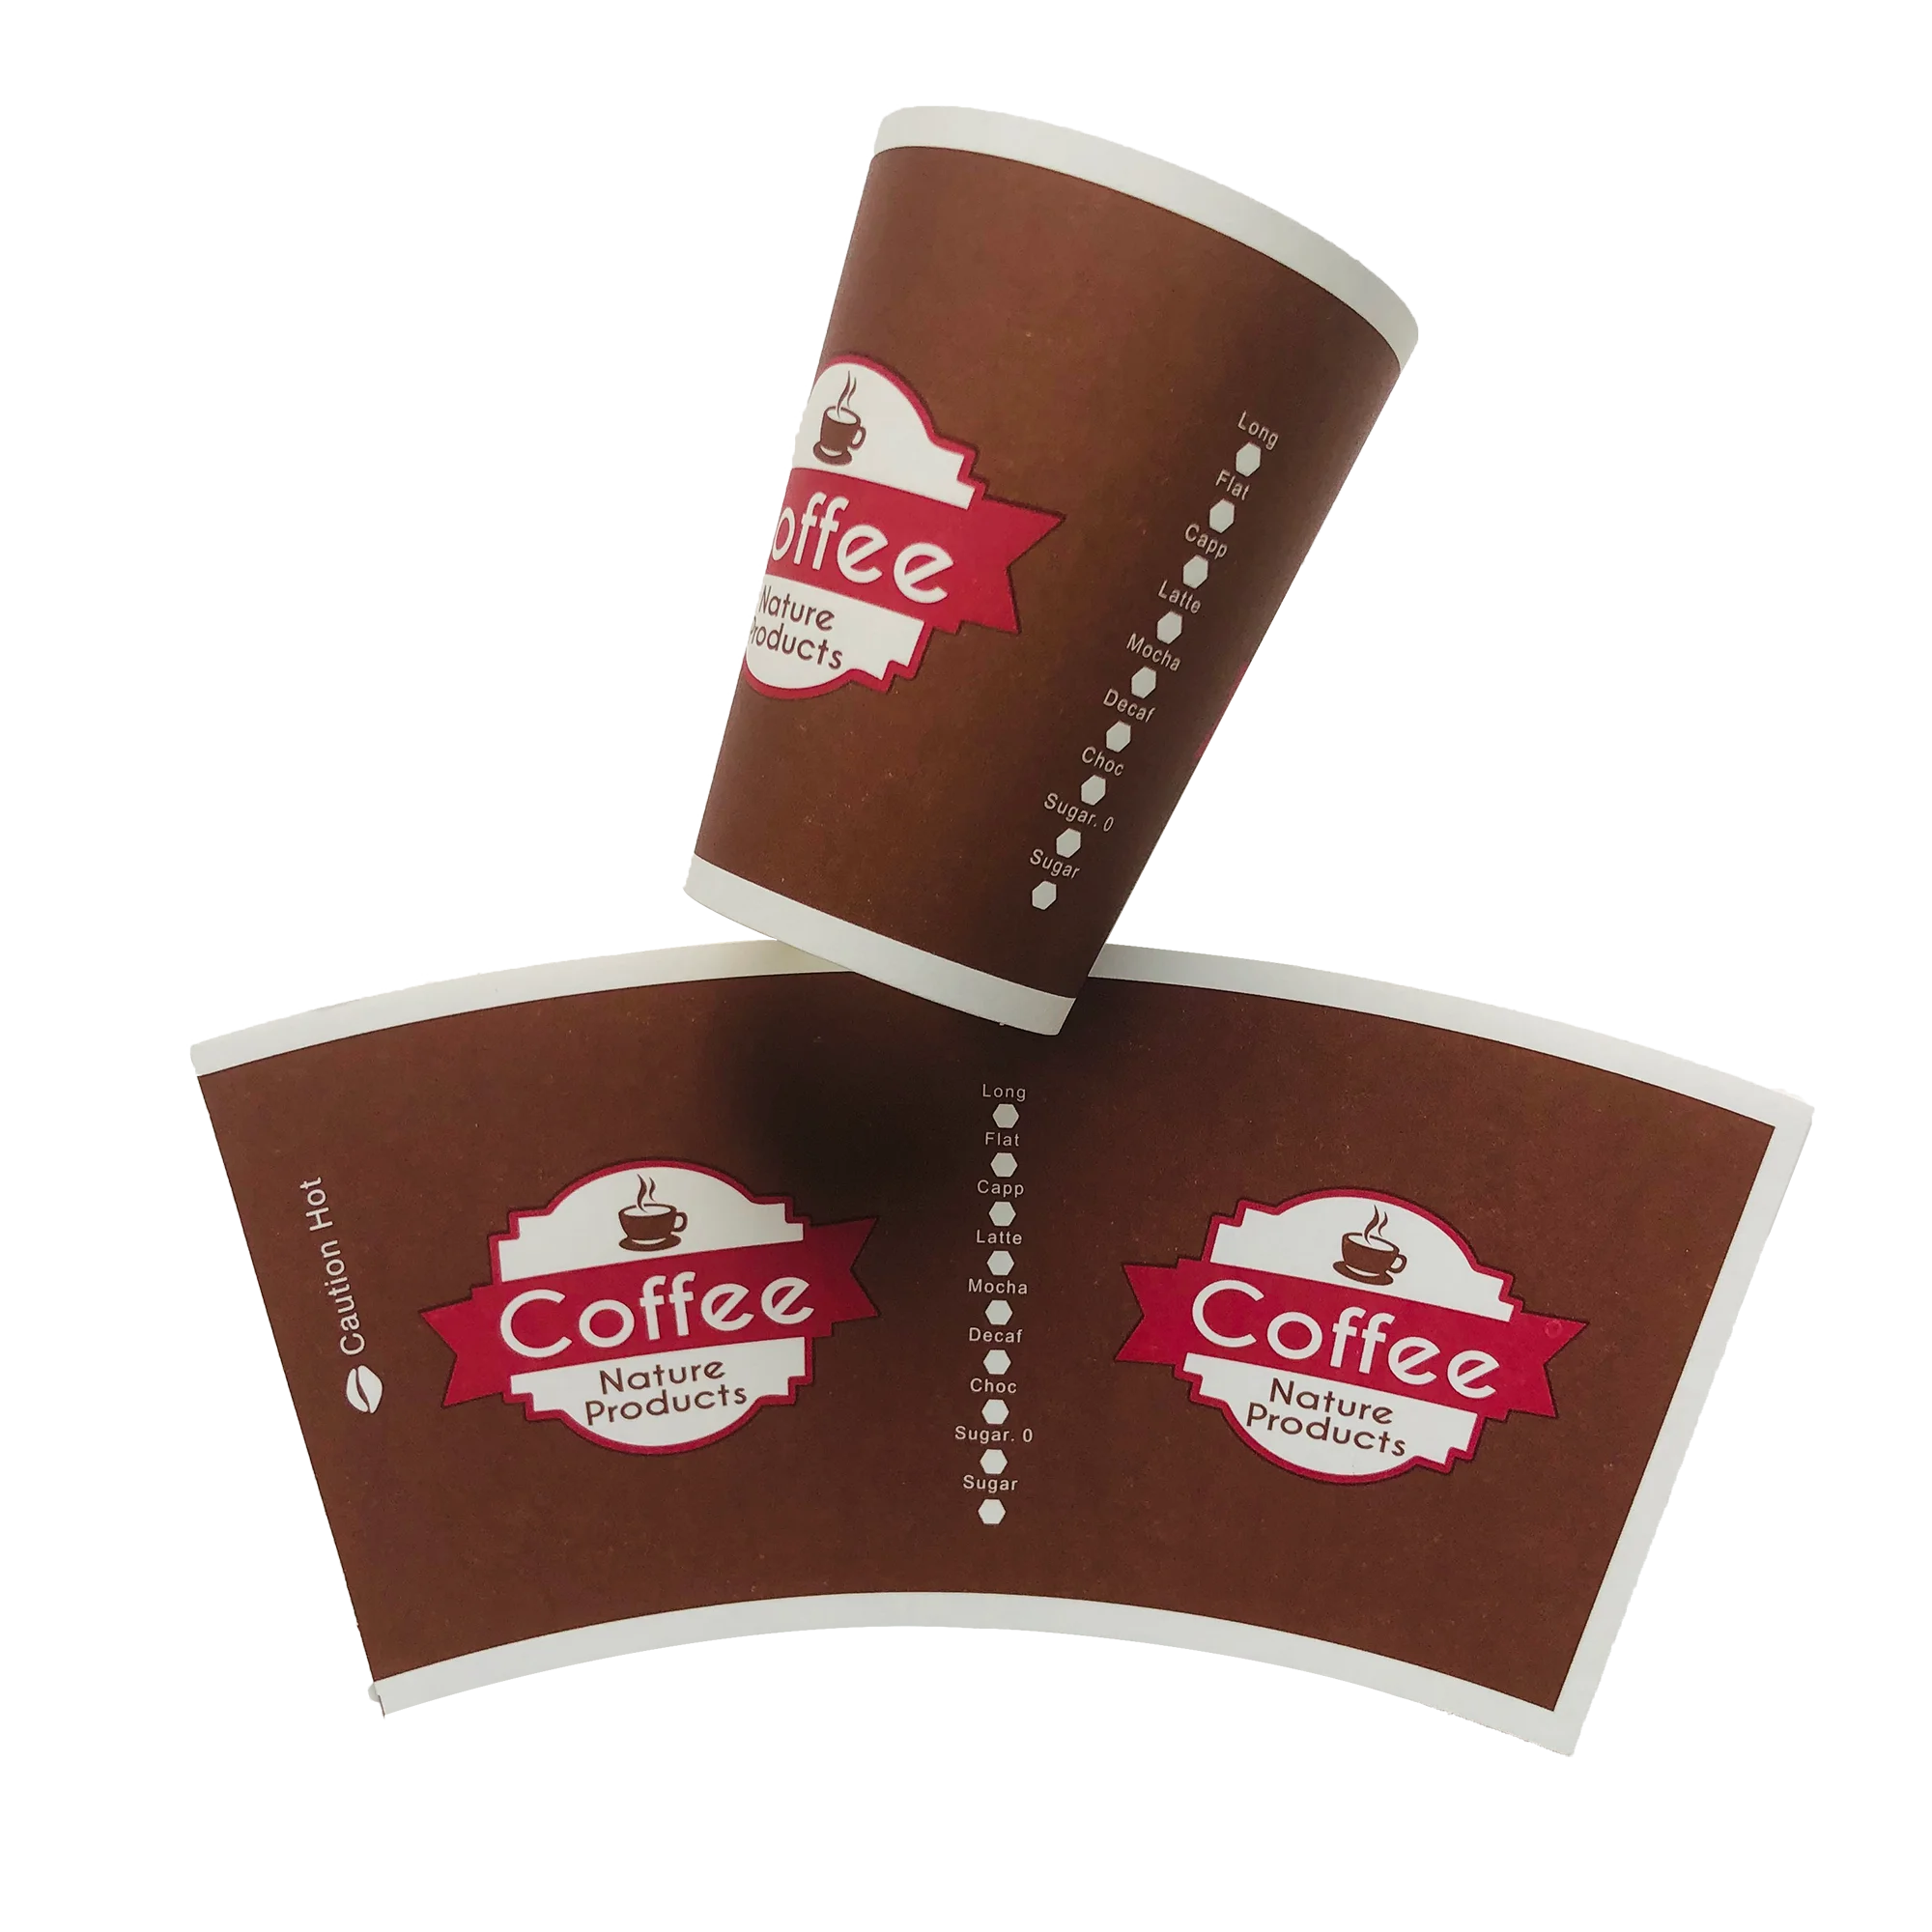 160gsm paper cup fan customized size and design Hot Drink Tea coffee cups Beverage Use paper cup blank Factory direct sales